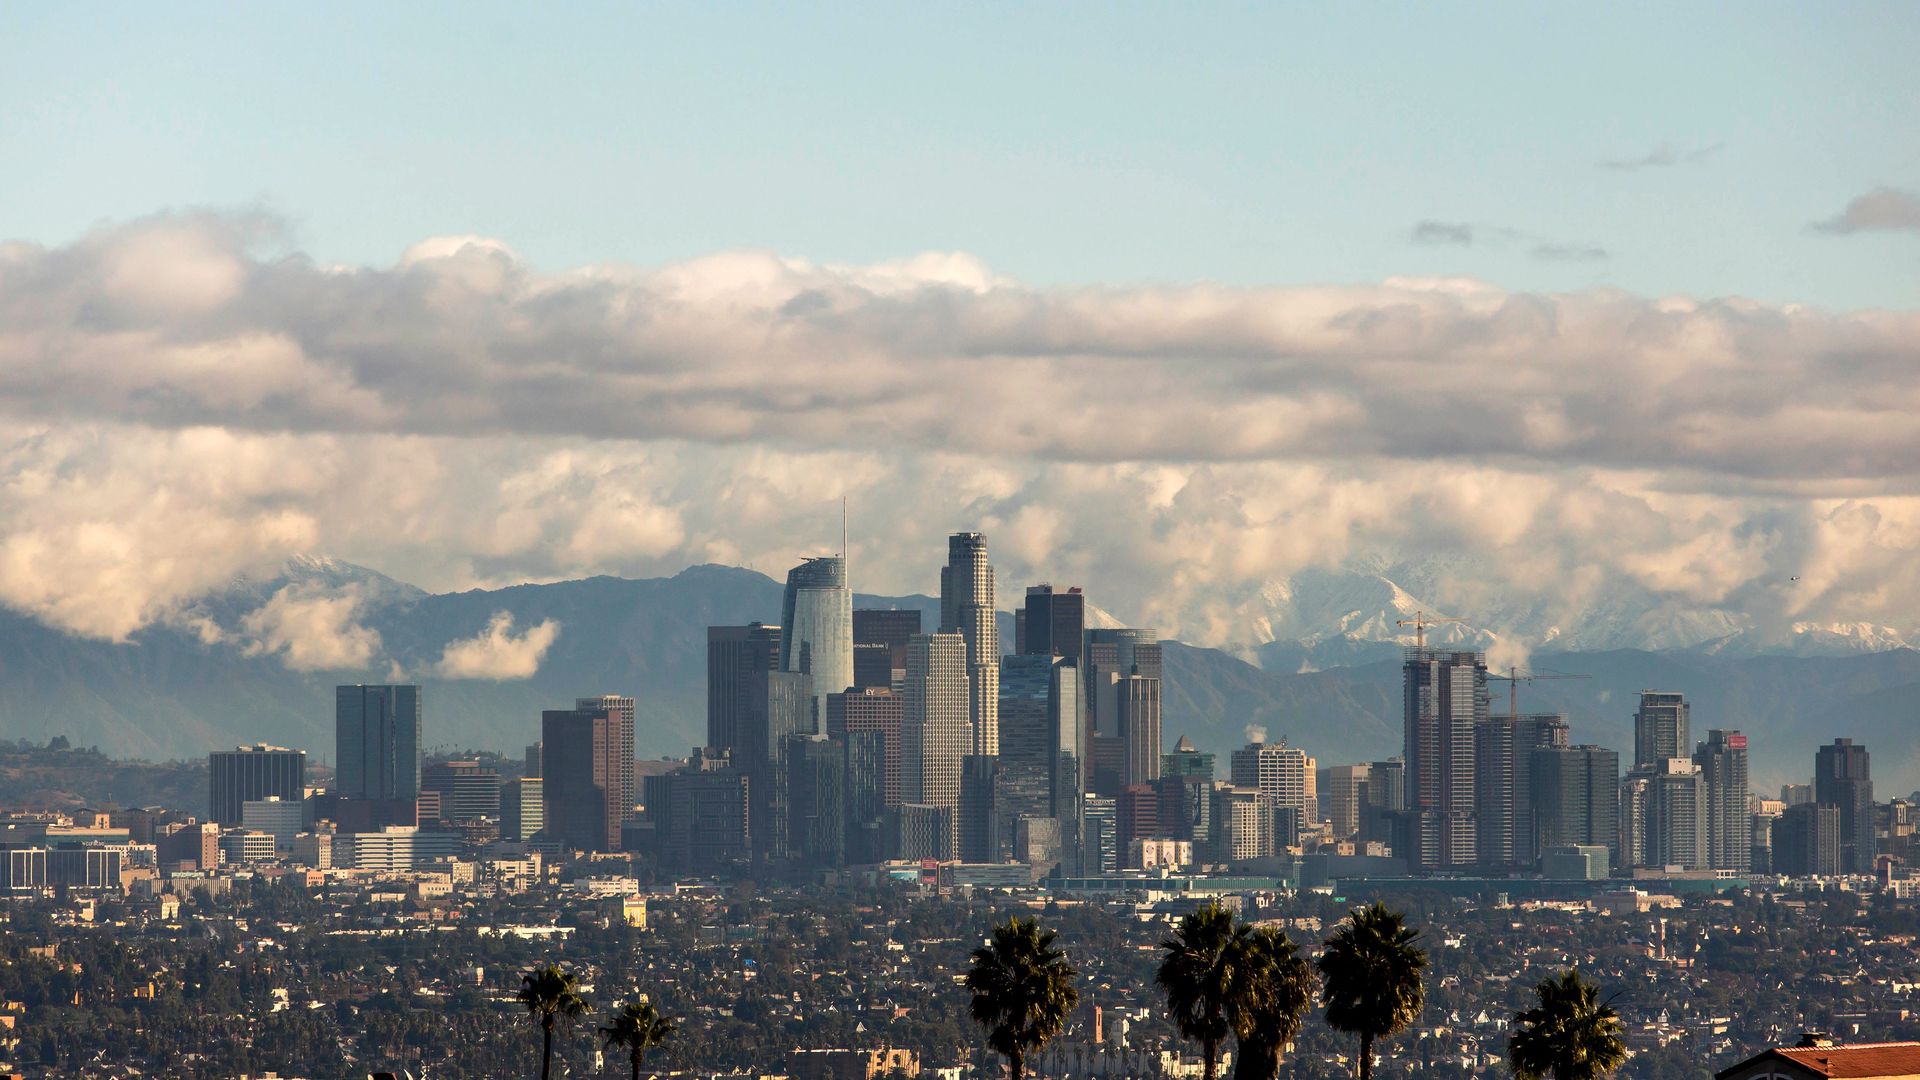 A view of the downtown Los Angeles